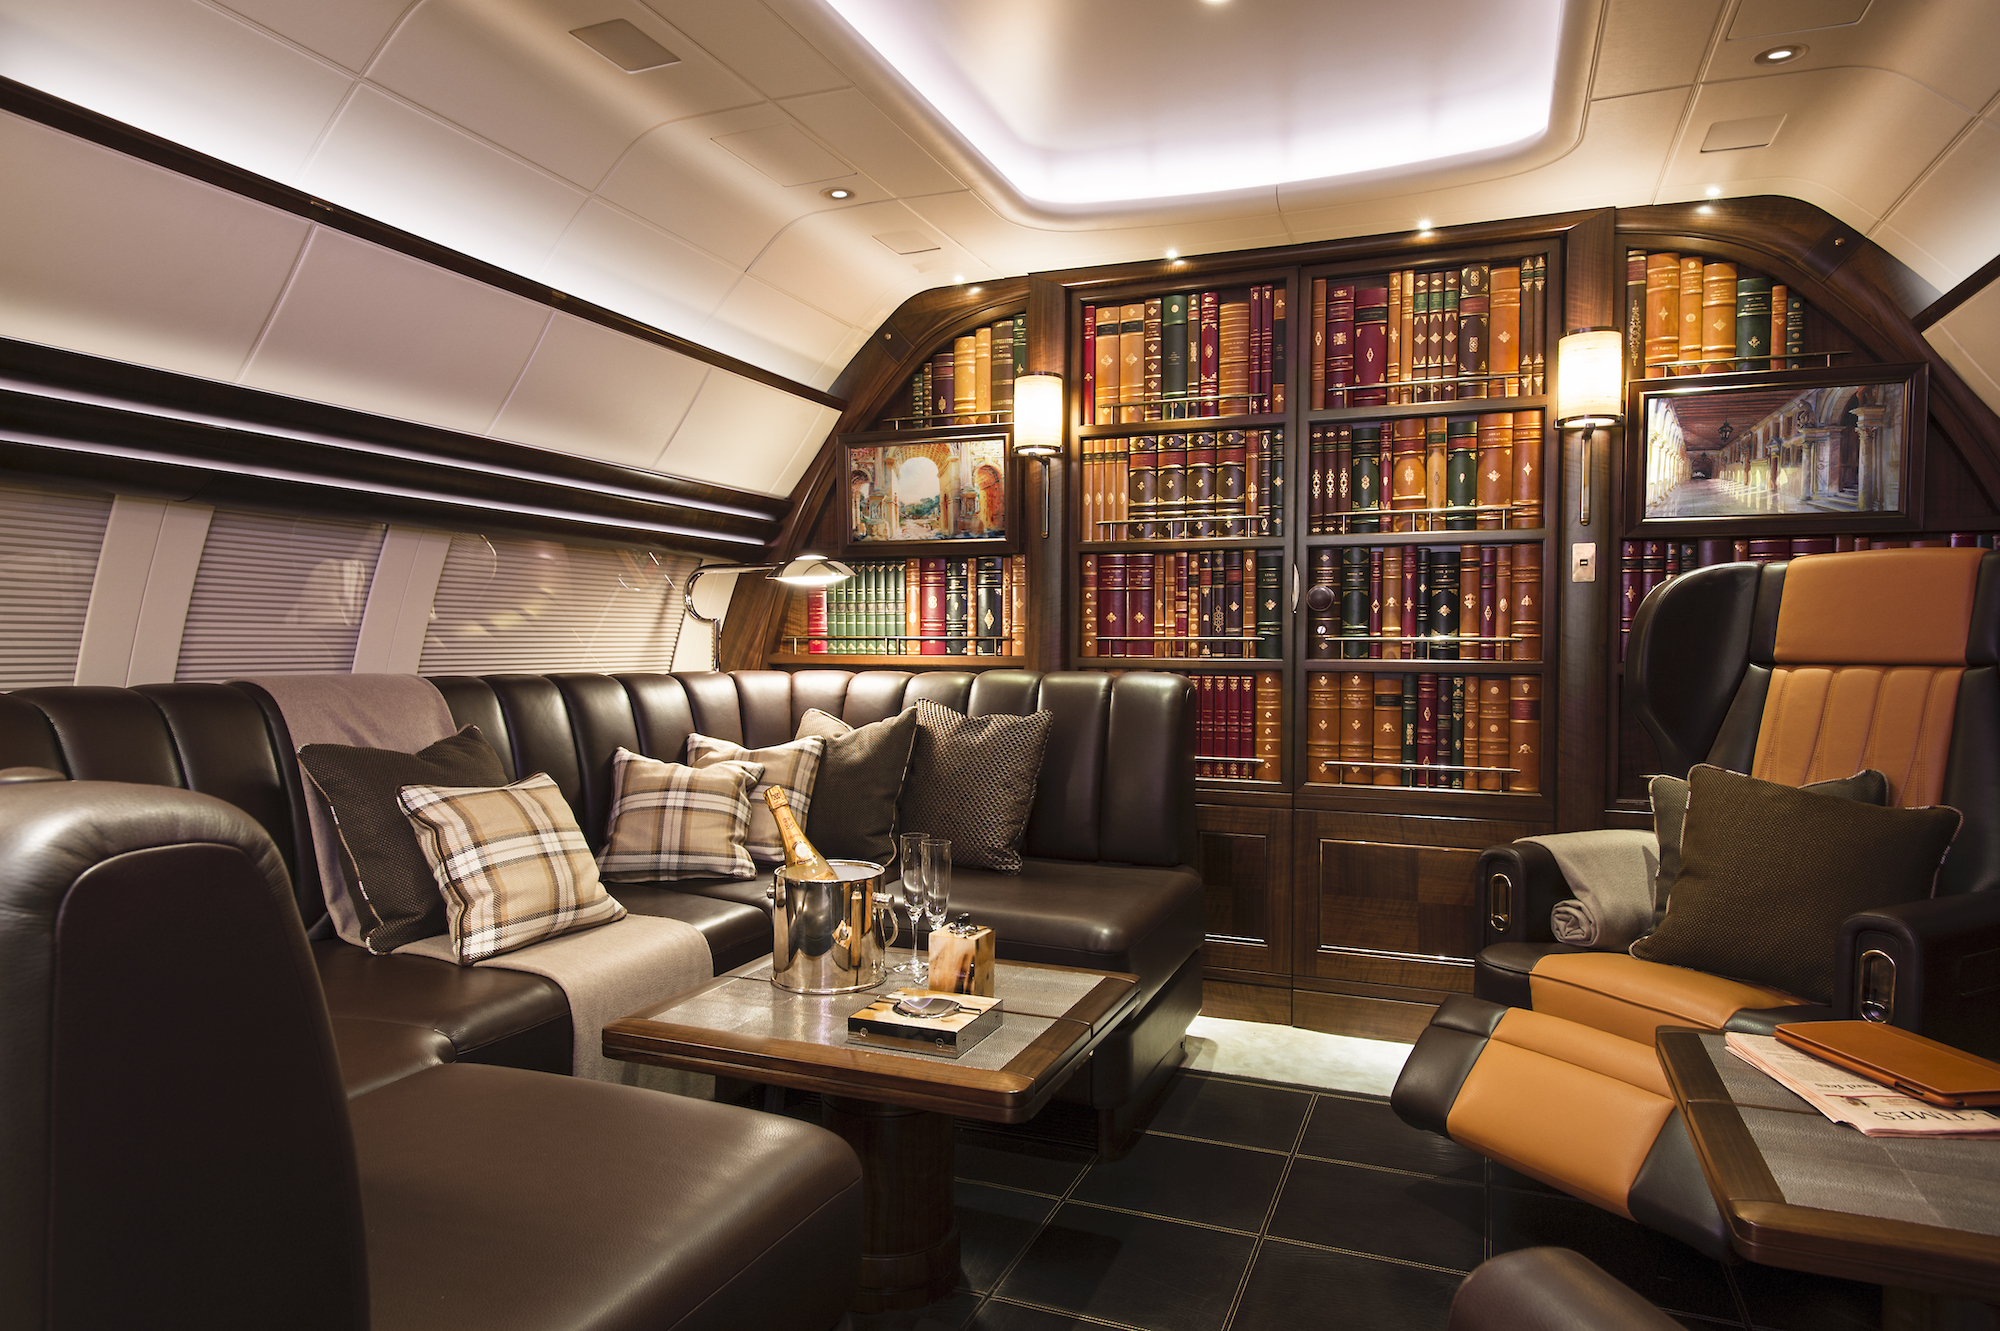 An Atlas jet with interior design by Winch Design. The designers created a book-lined cabin, creating the feel of a private members' club in the sky